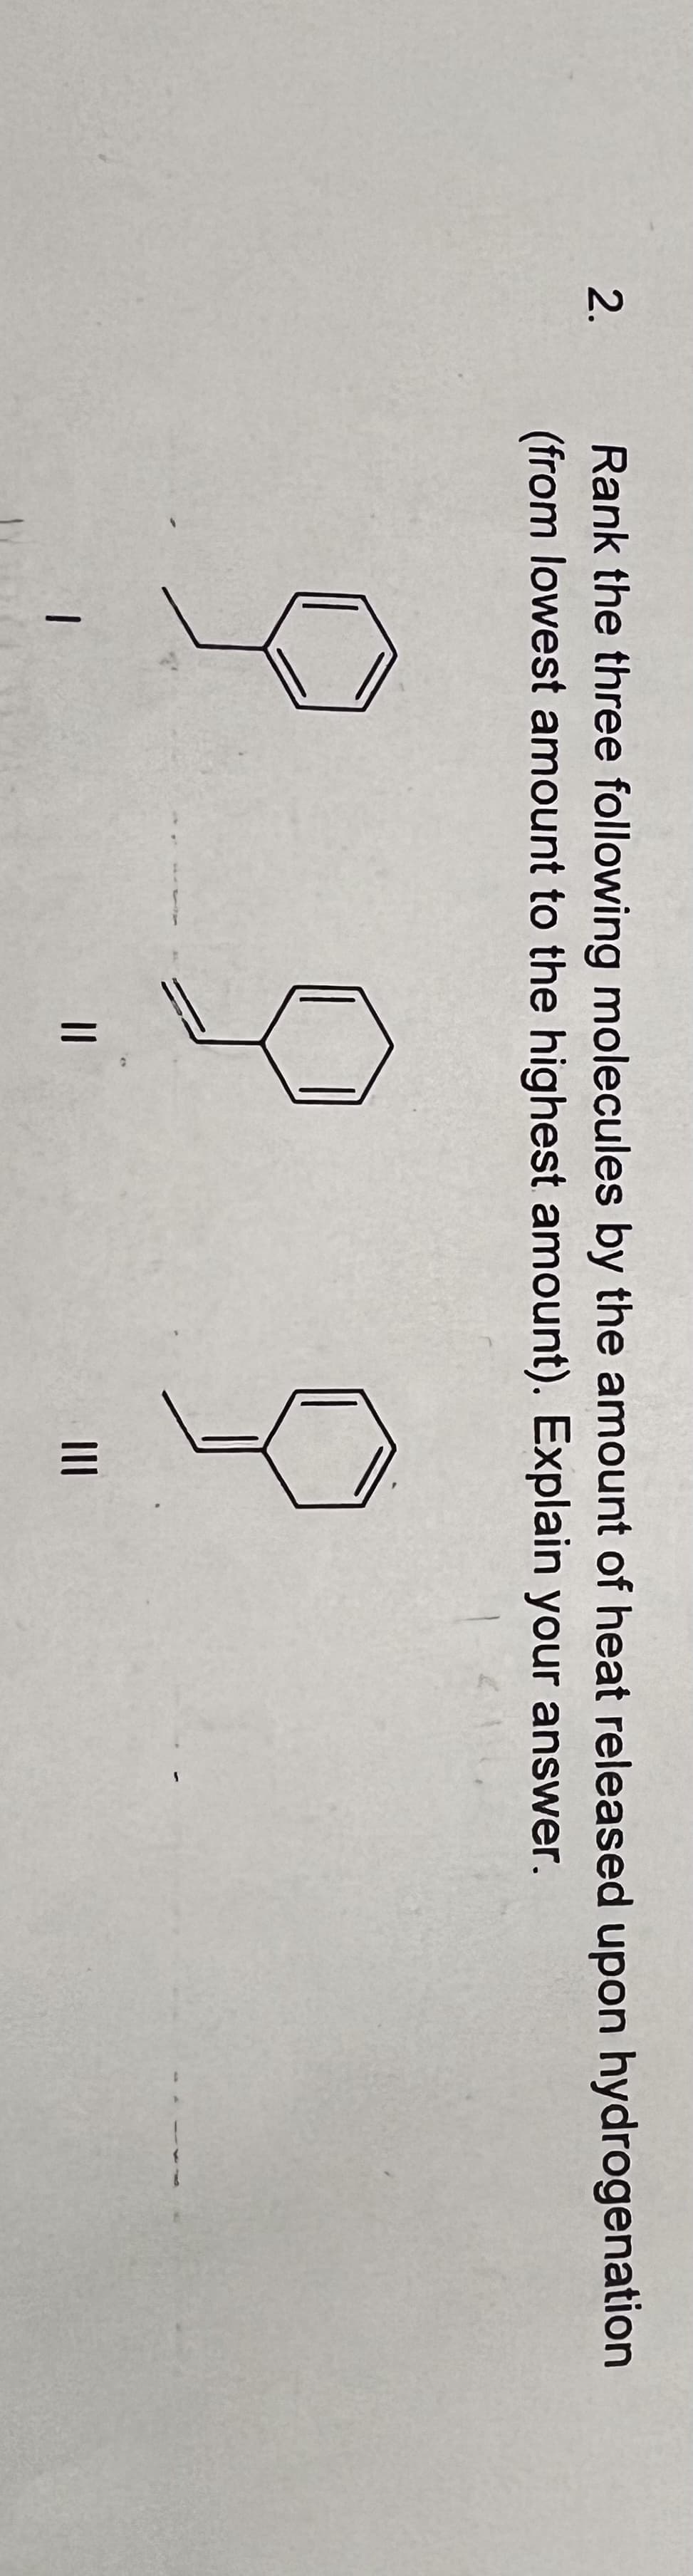 2.
Rank the three following molecules by the amount of heat released upon hydrogenation
(from lowest amount to the highest amount). Explain your answer.
9
1
|||